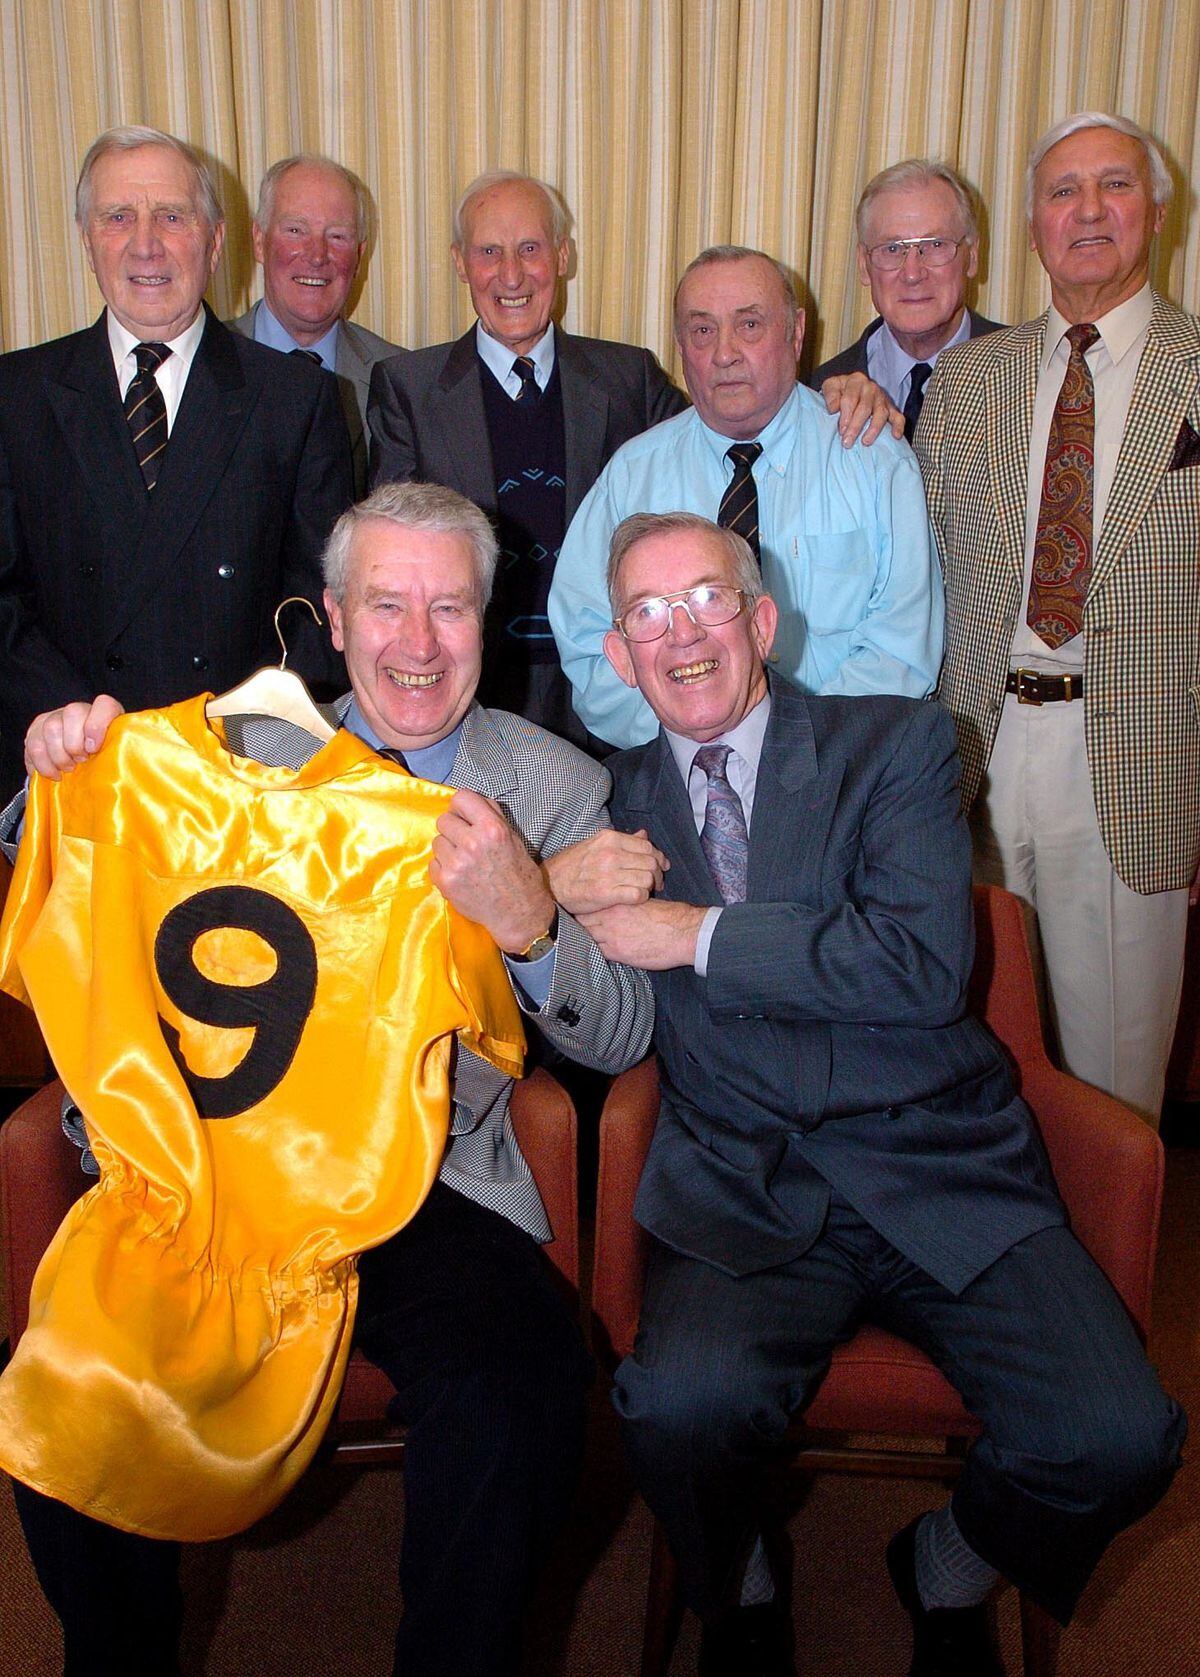 This 2004 picture from our files shows former Wolves striker Roy Swinbourne being reunited with the fluorescent shirt he wore against Honved in 1954. Seated with him are Peter Broadbent, while watching are other team members, from left, Bill Shorthouse, Ron Flowers, Bert Williams, Les Smith, Bill Slater and Eddie Stuart. 